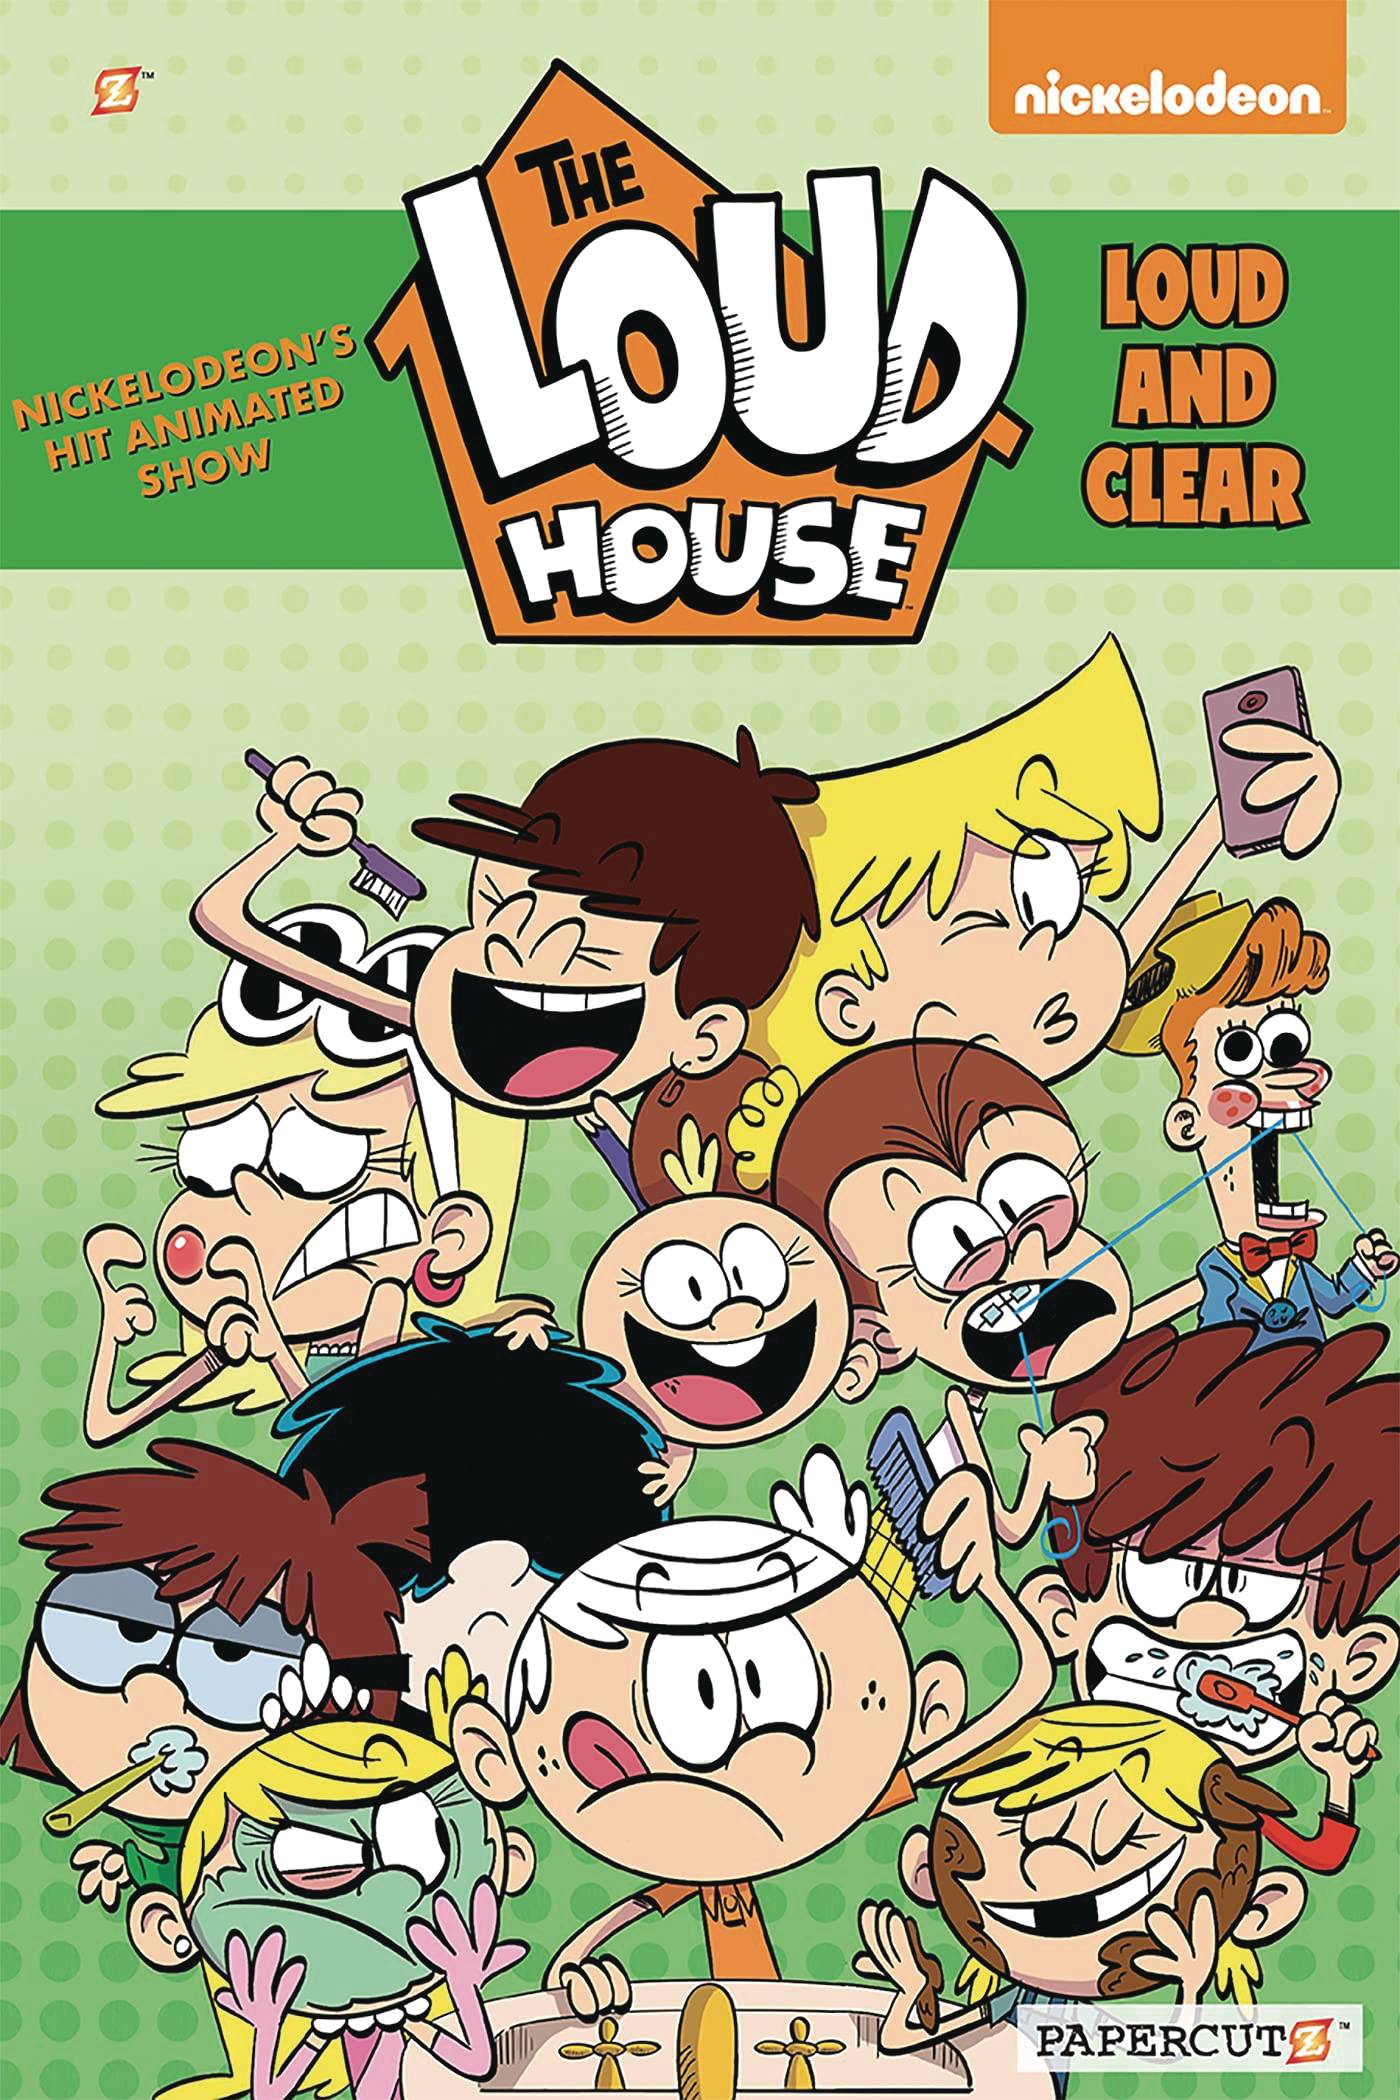 LOUD HOUSE HC VOL 16 LOUD AND CLEAR